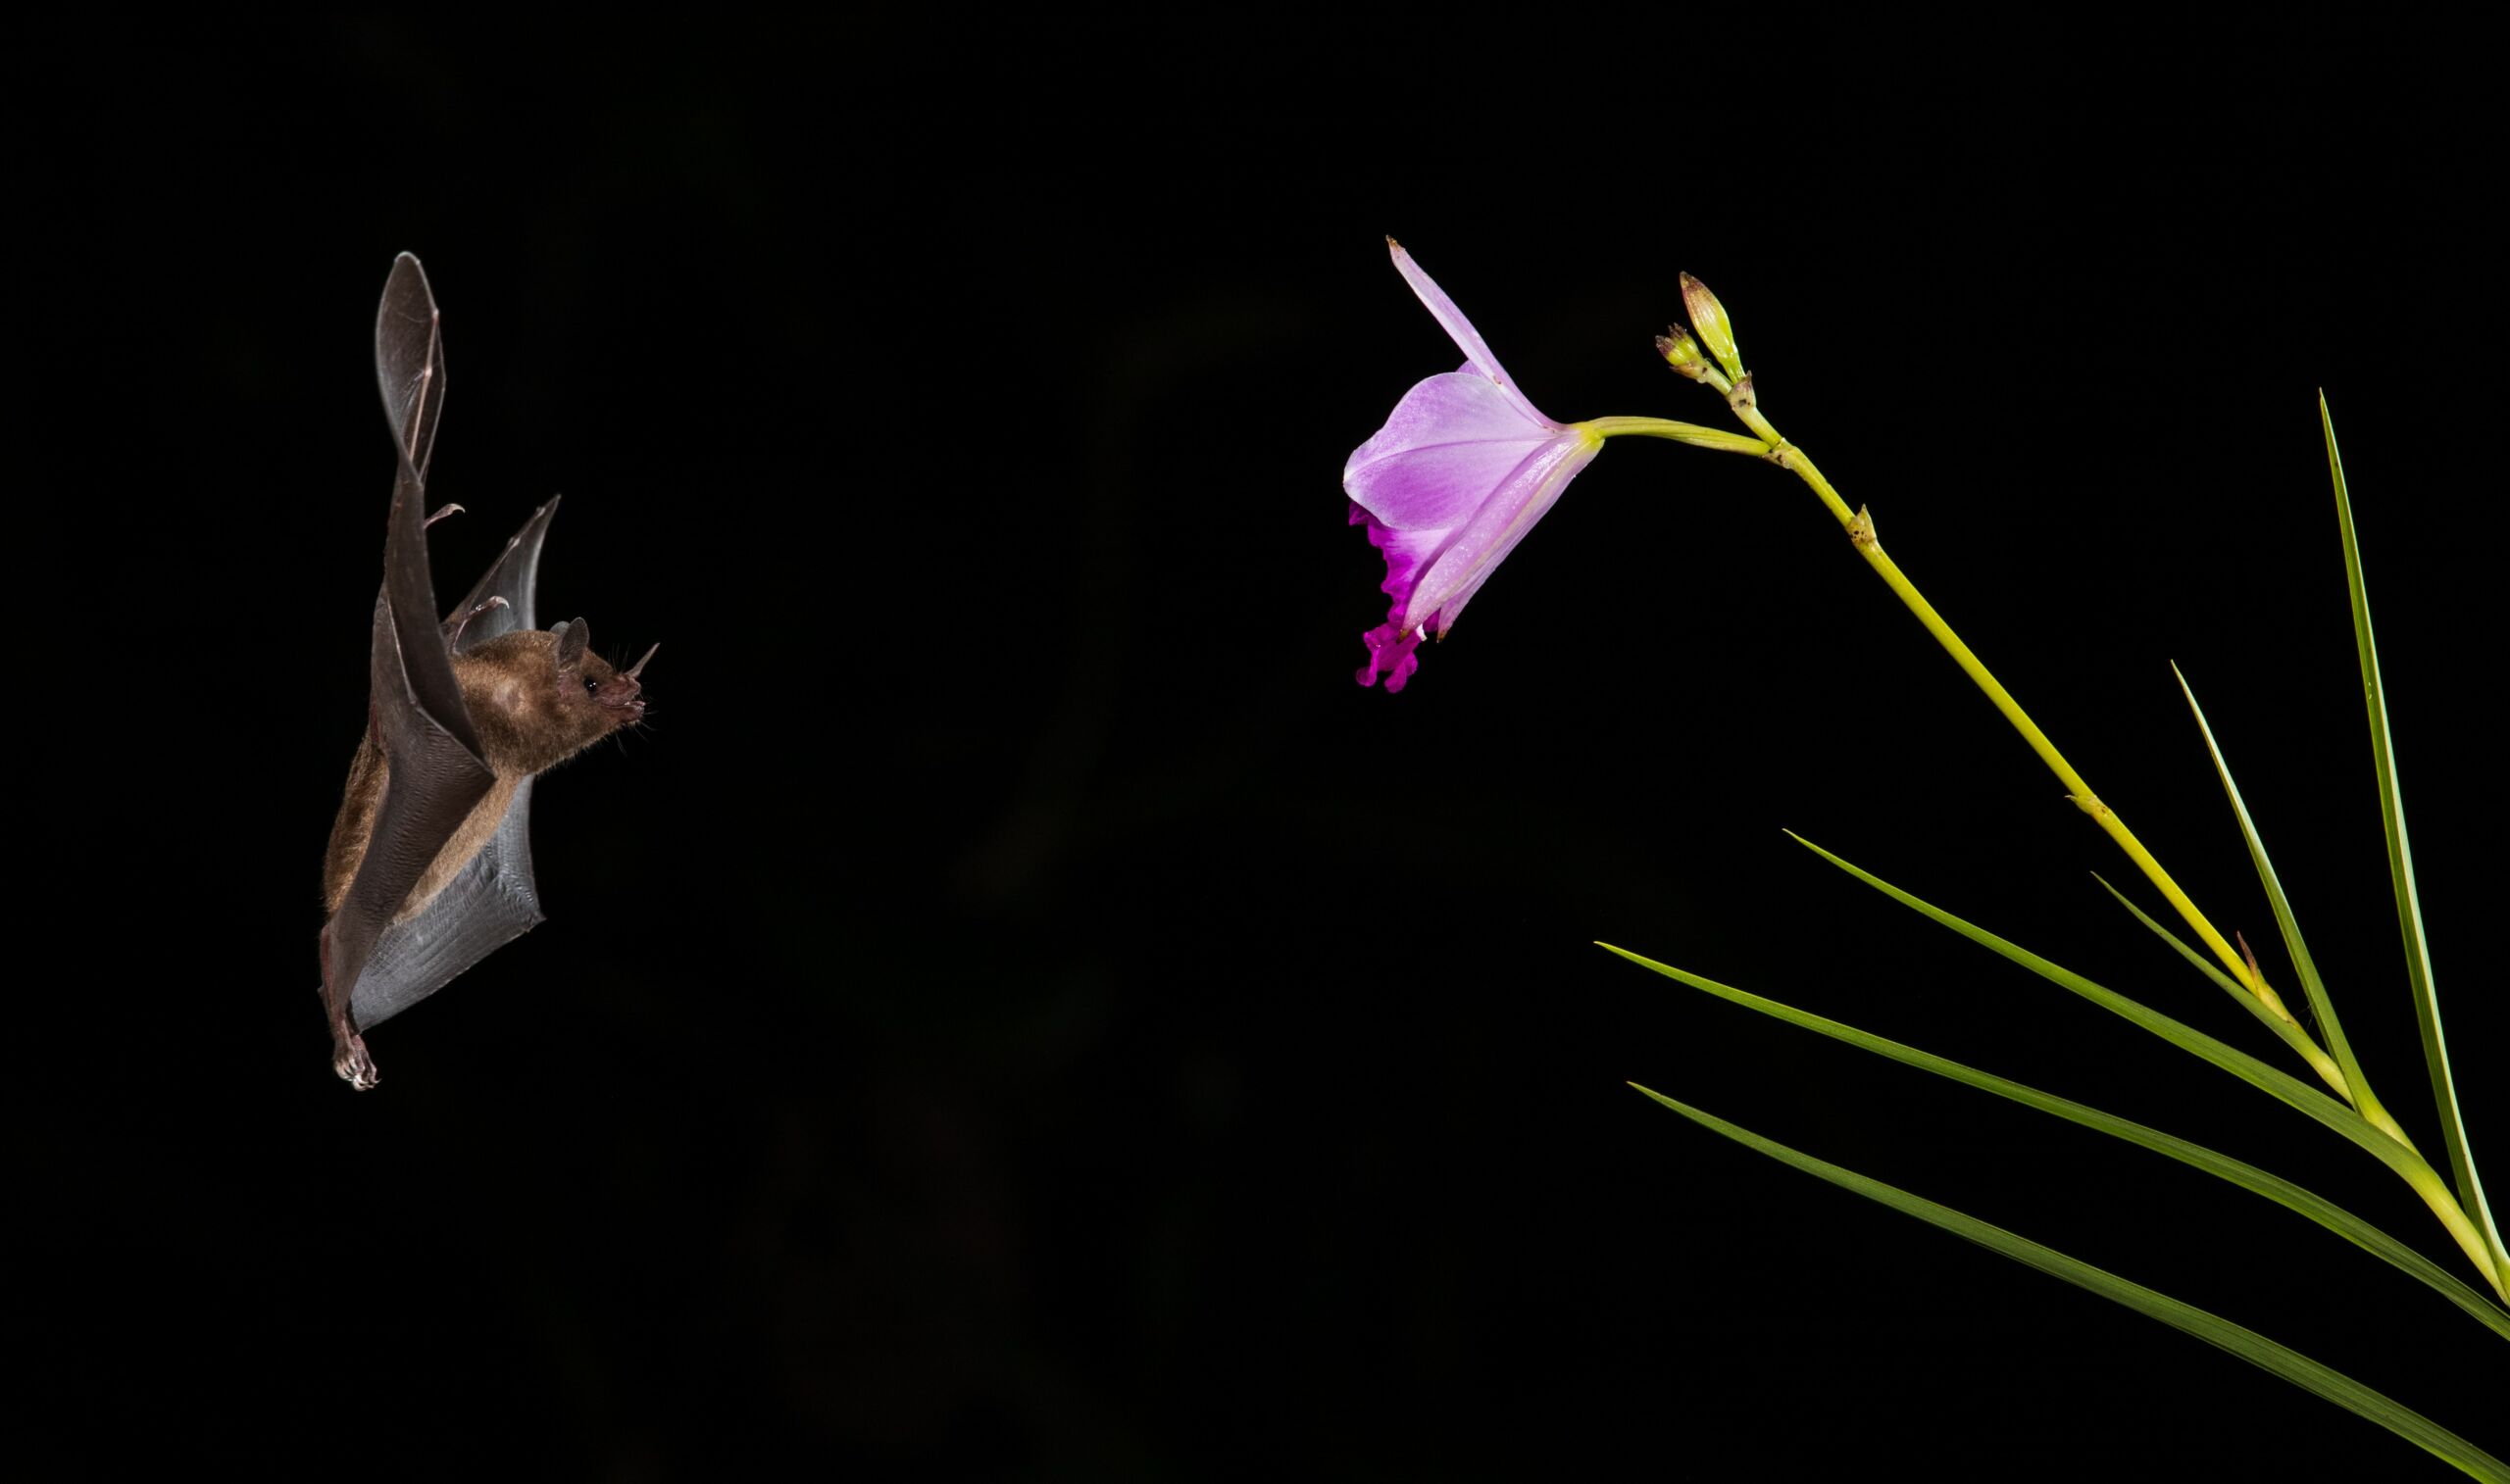 Working the Night Shift: Pollination After Dark